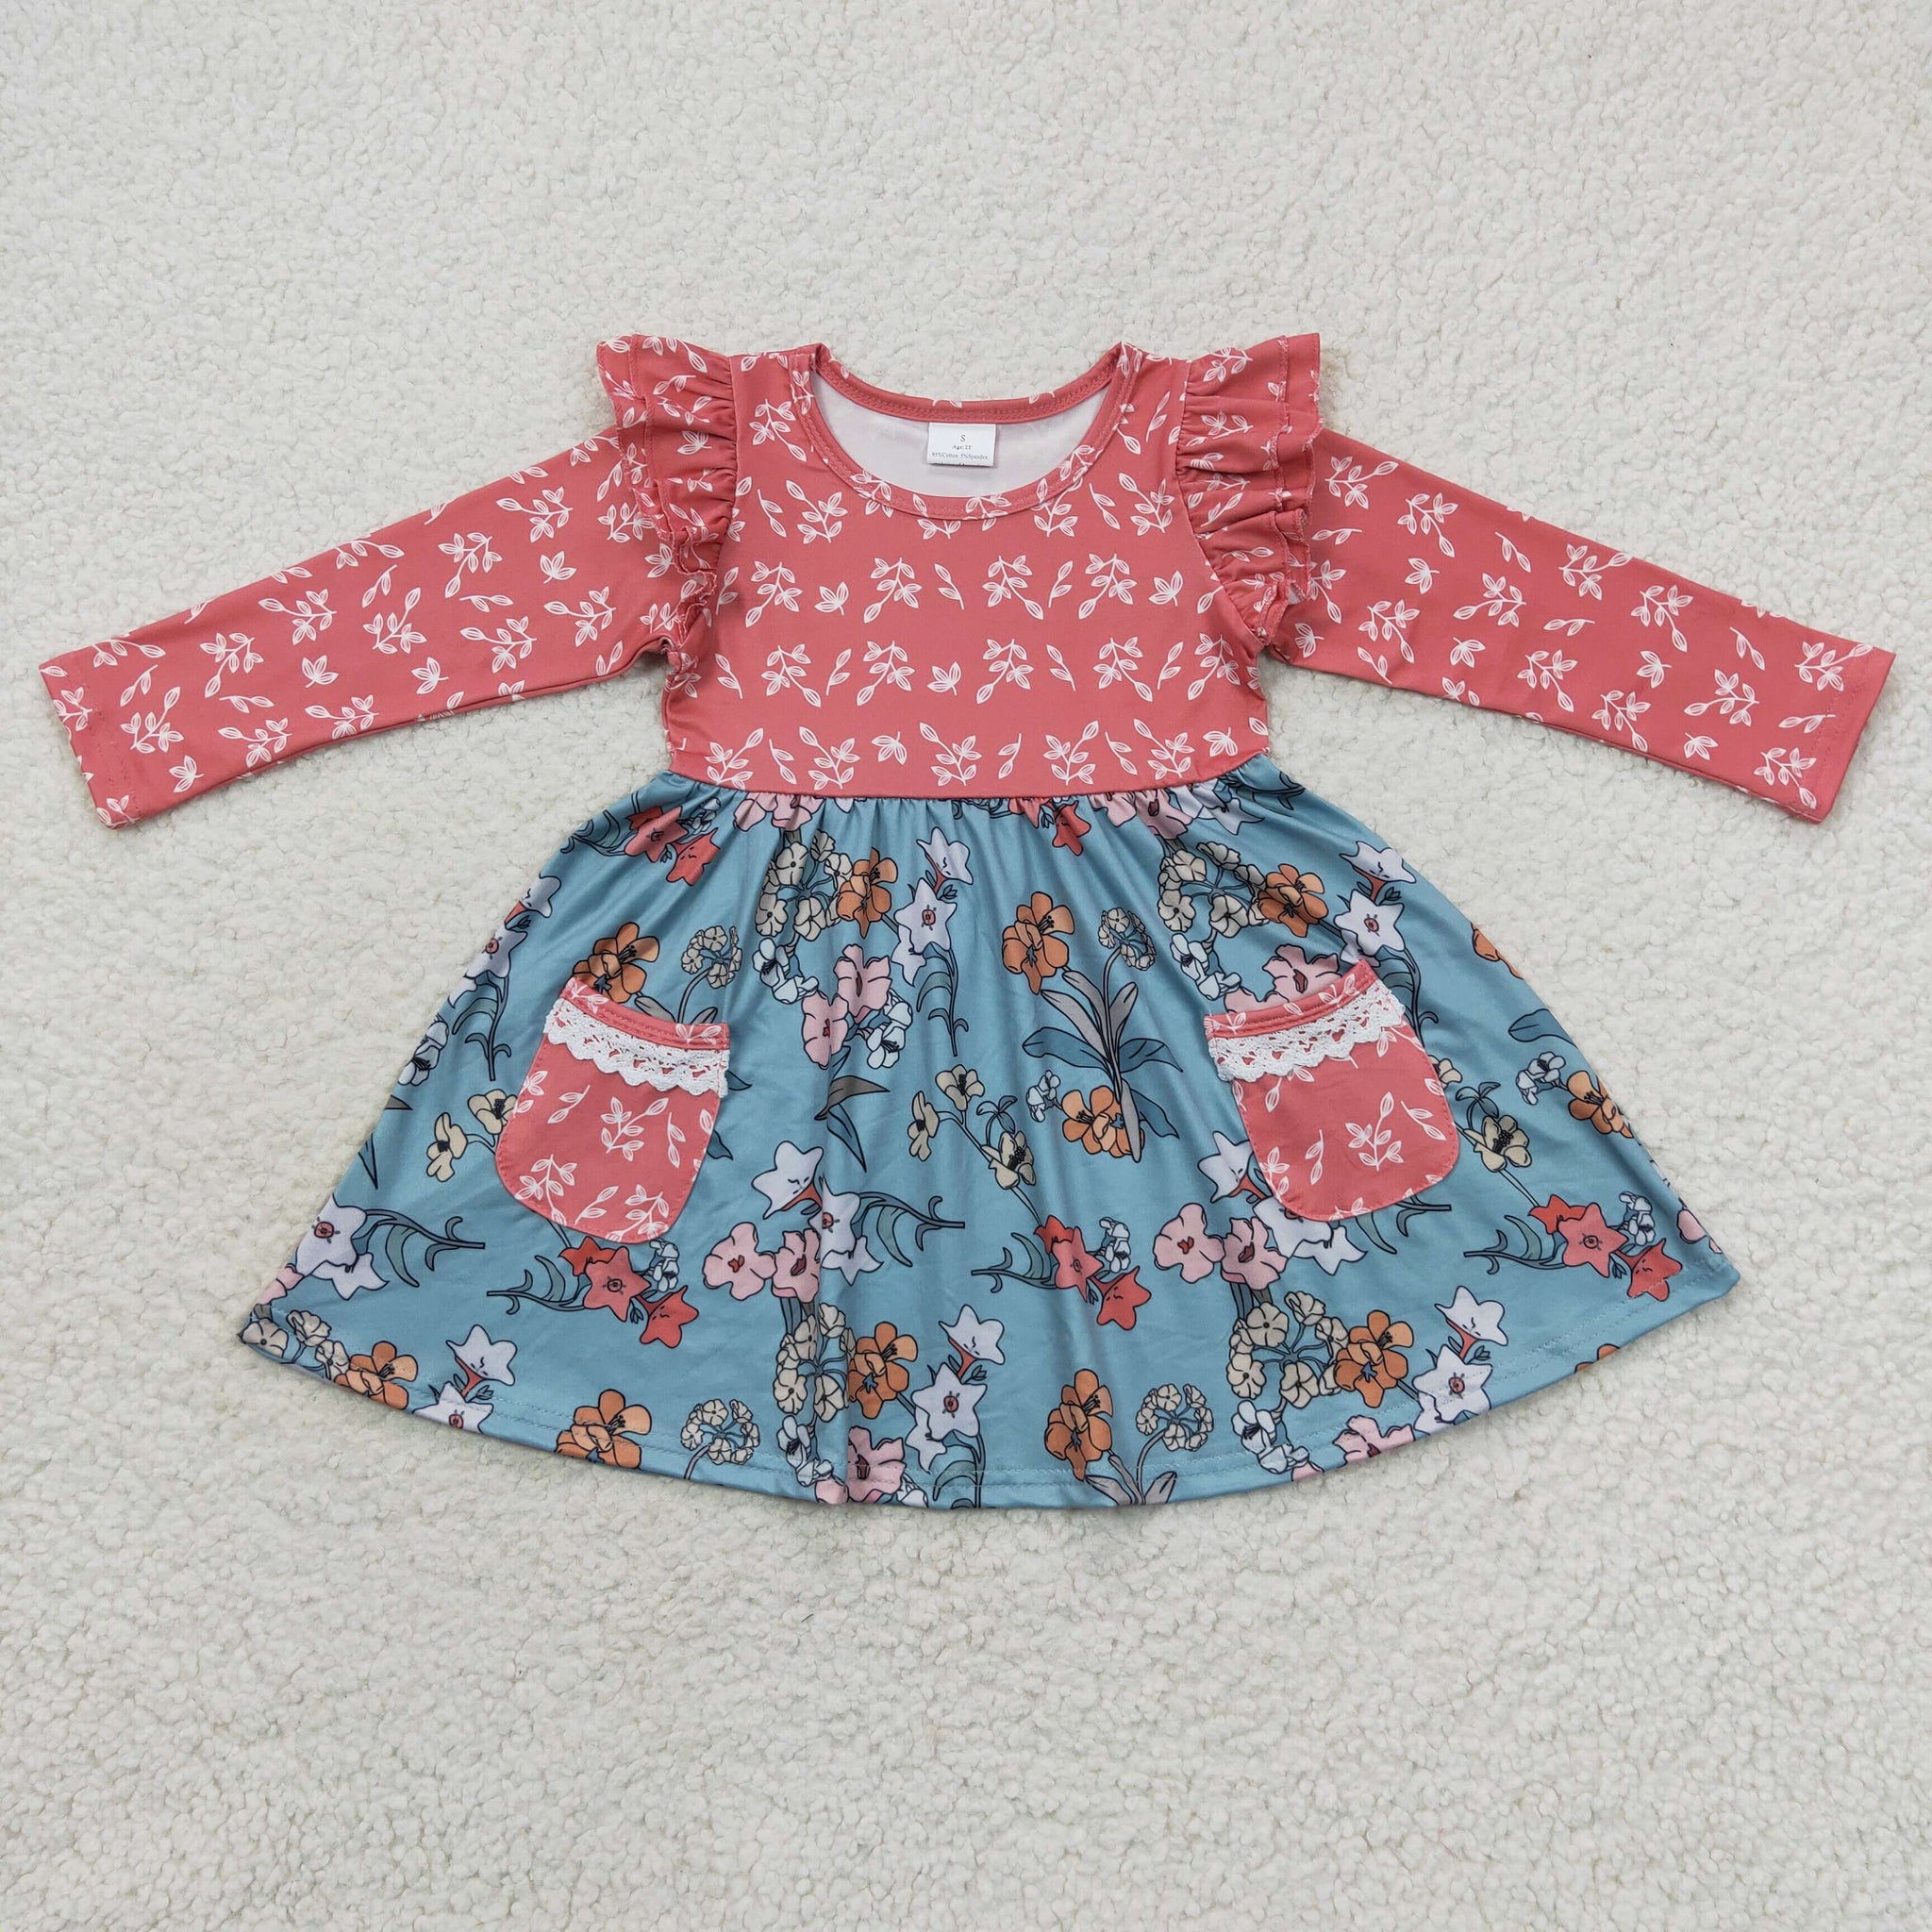 GLD0338 baby girl clothes floral girl winter dress